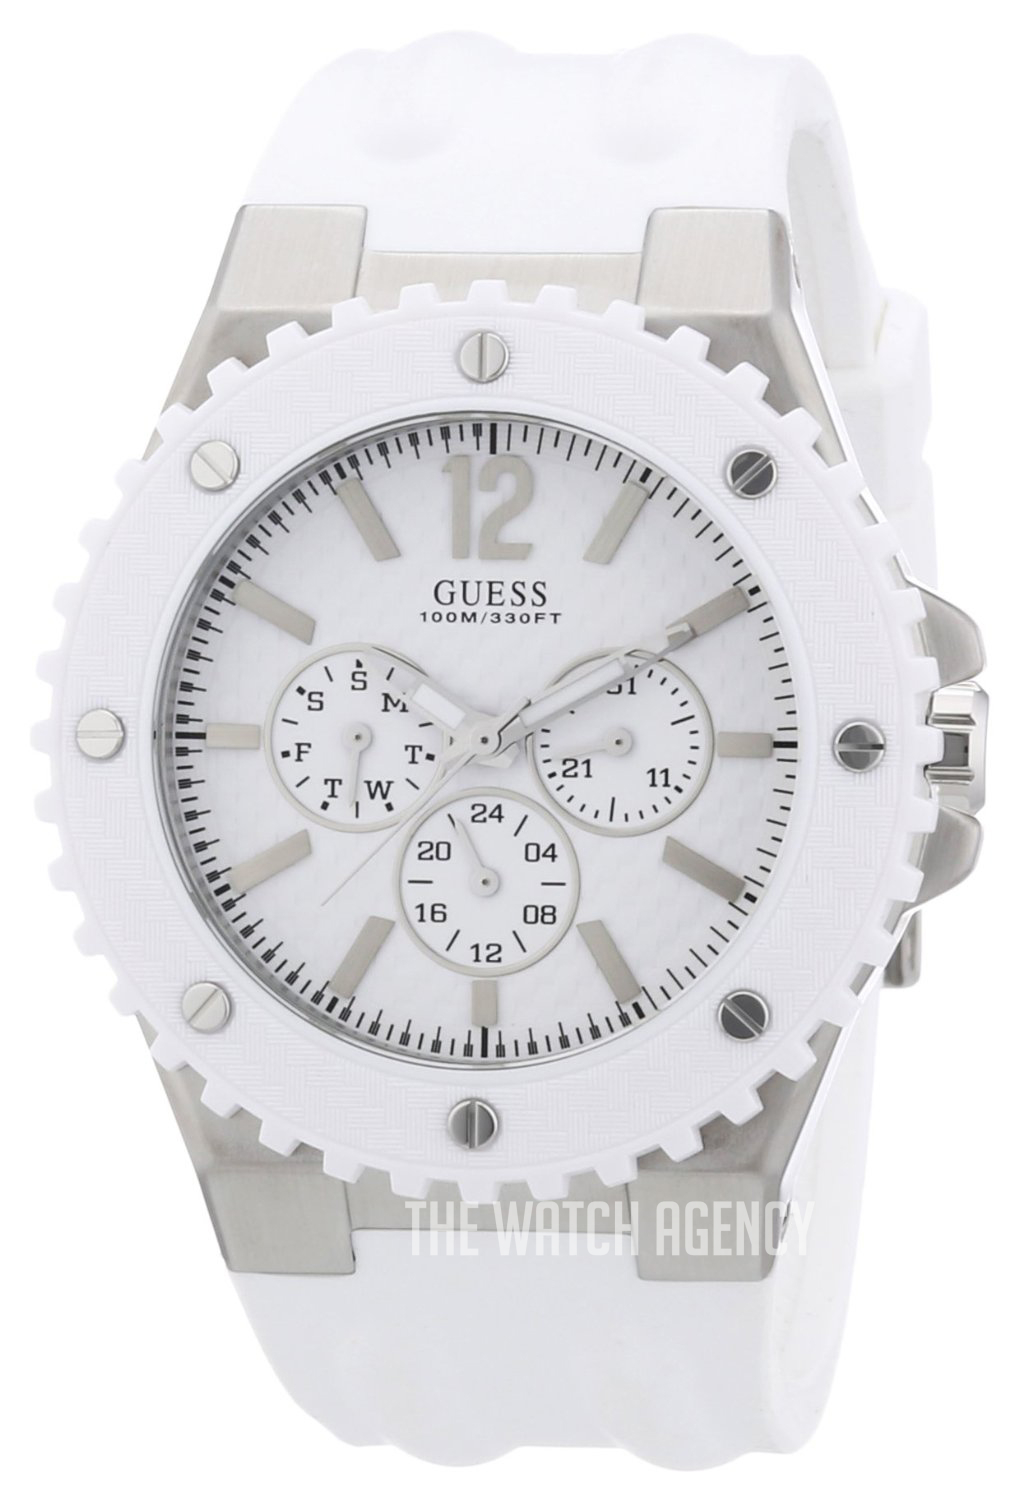 W10603G1 Guess | OverDrive TheWatchAgency™